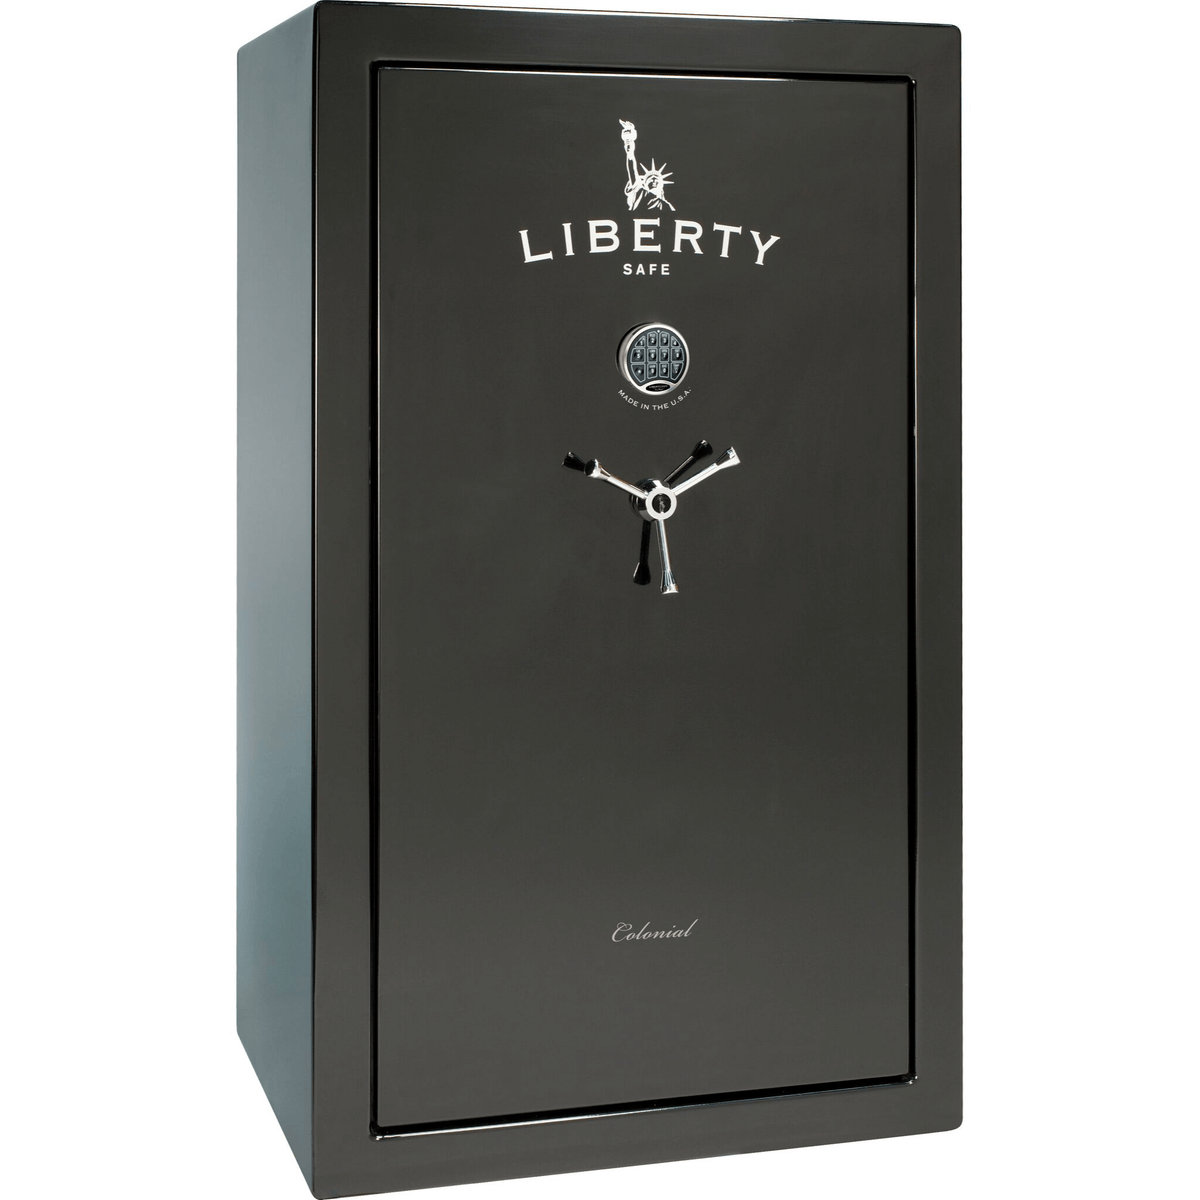 Colonial Series | Level 4 Security | 75 Minute Fire Protection | Liberty Safe Norcal.